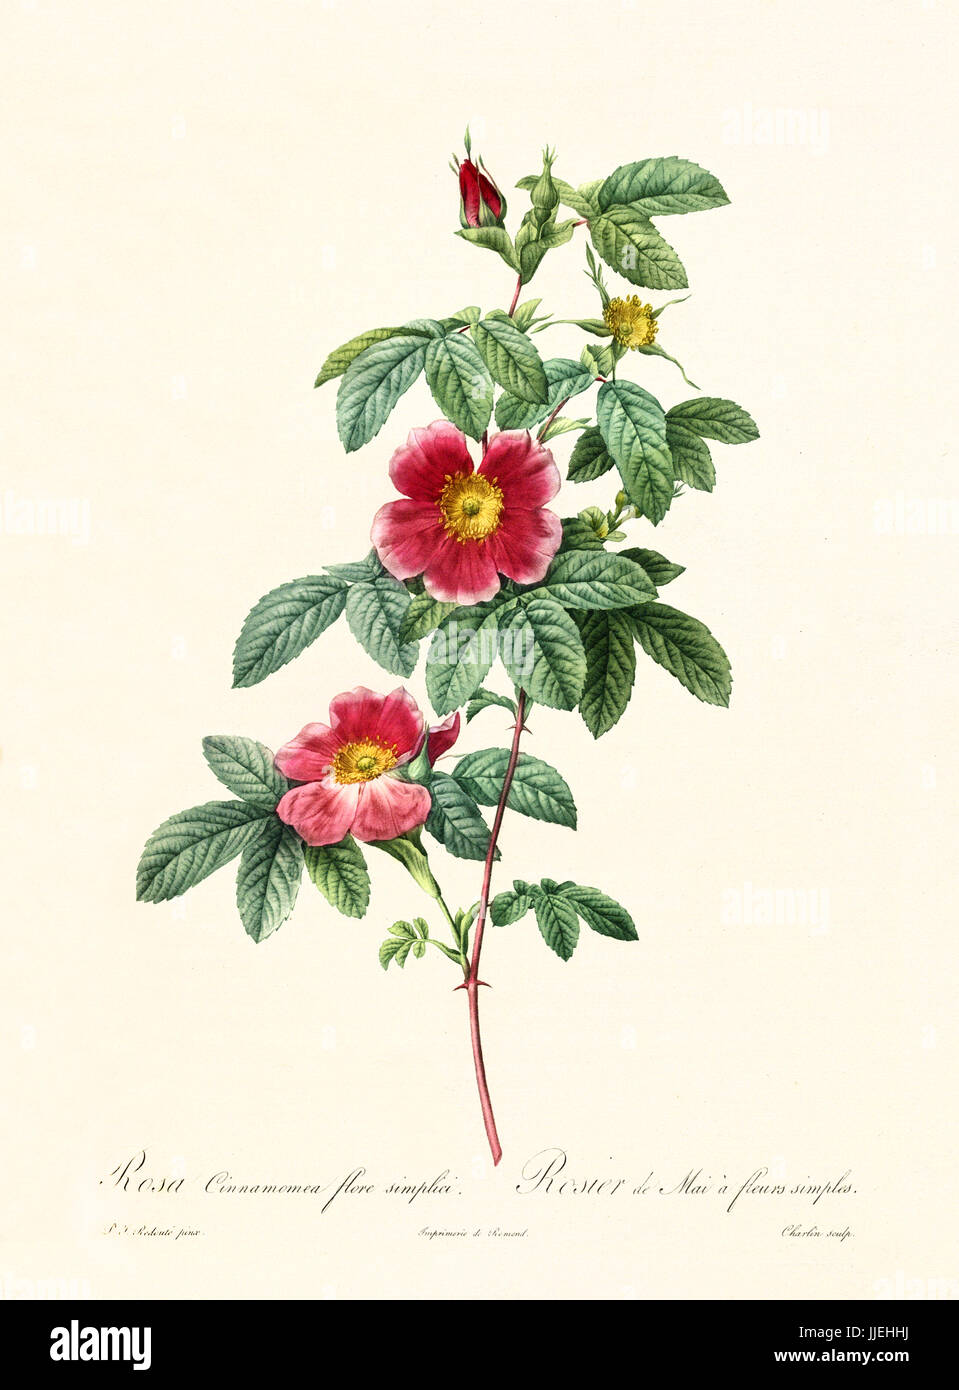 Old illustration of Rosa cimmamomea. Created by P. R. Redoute, published on Les Roses, Imp. Firmin Didot, Paris, 1817-24 Stock Photo